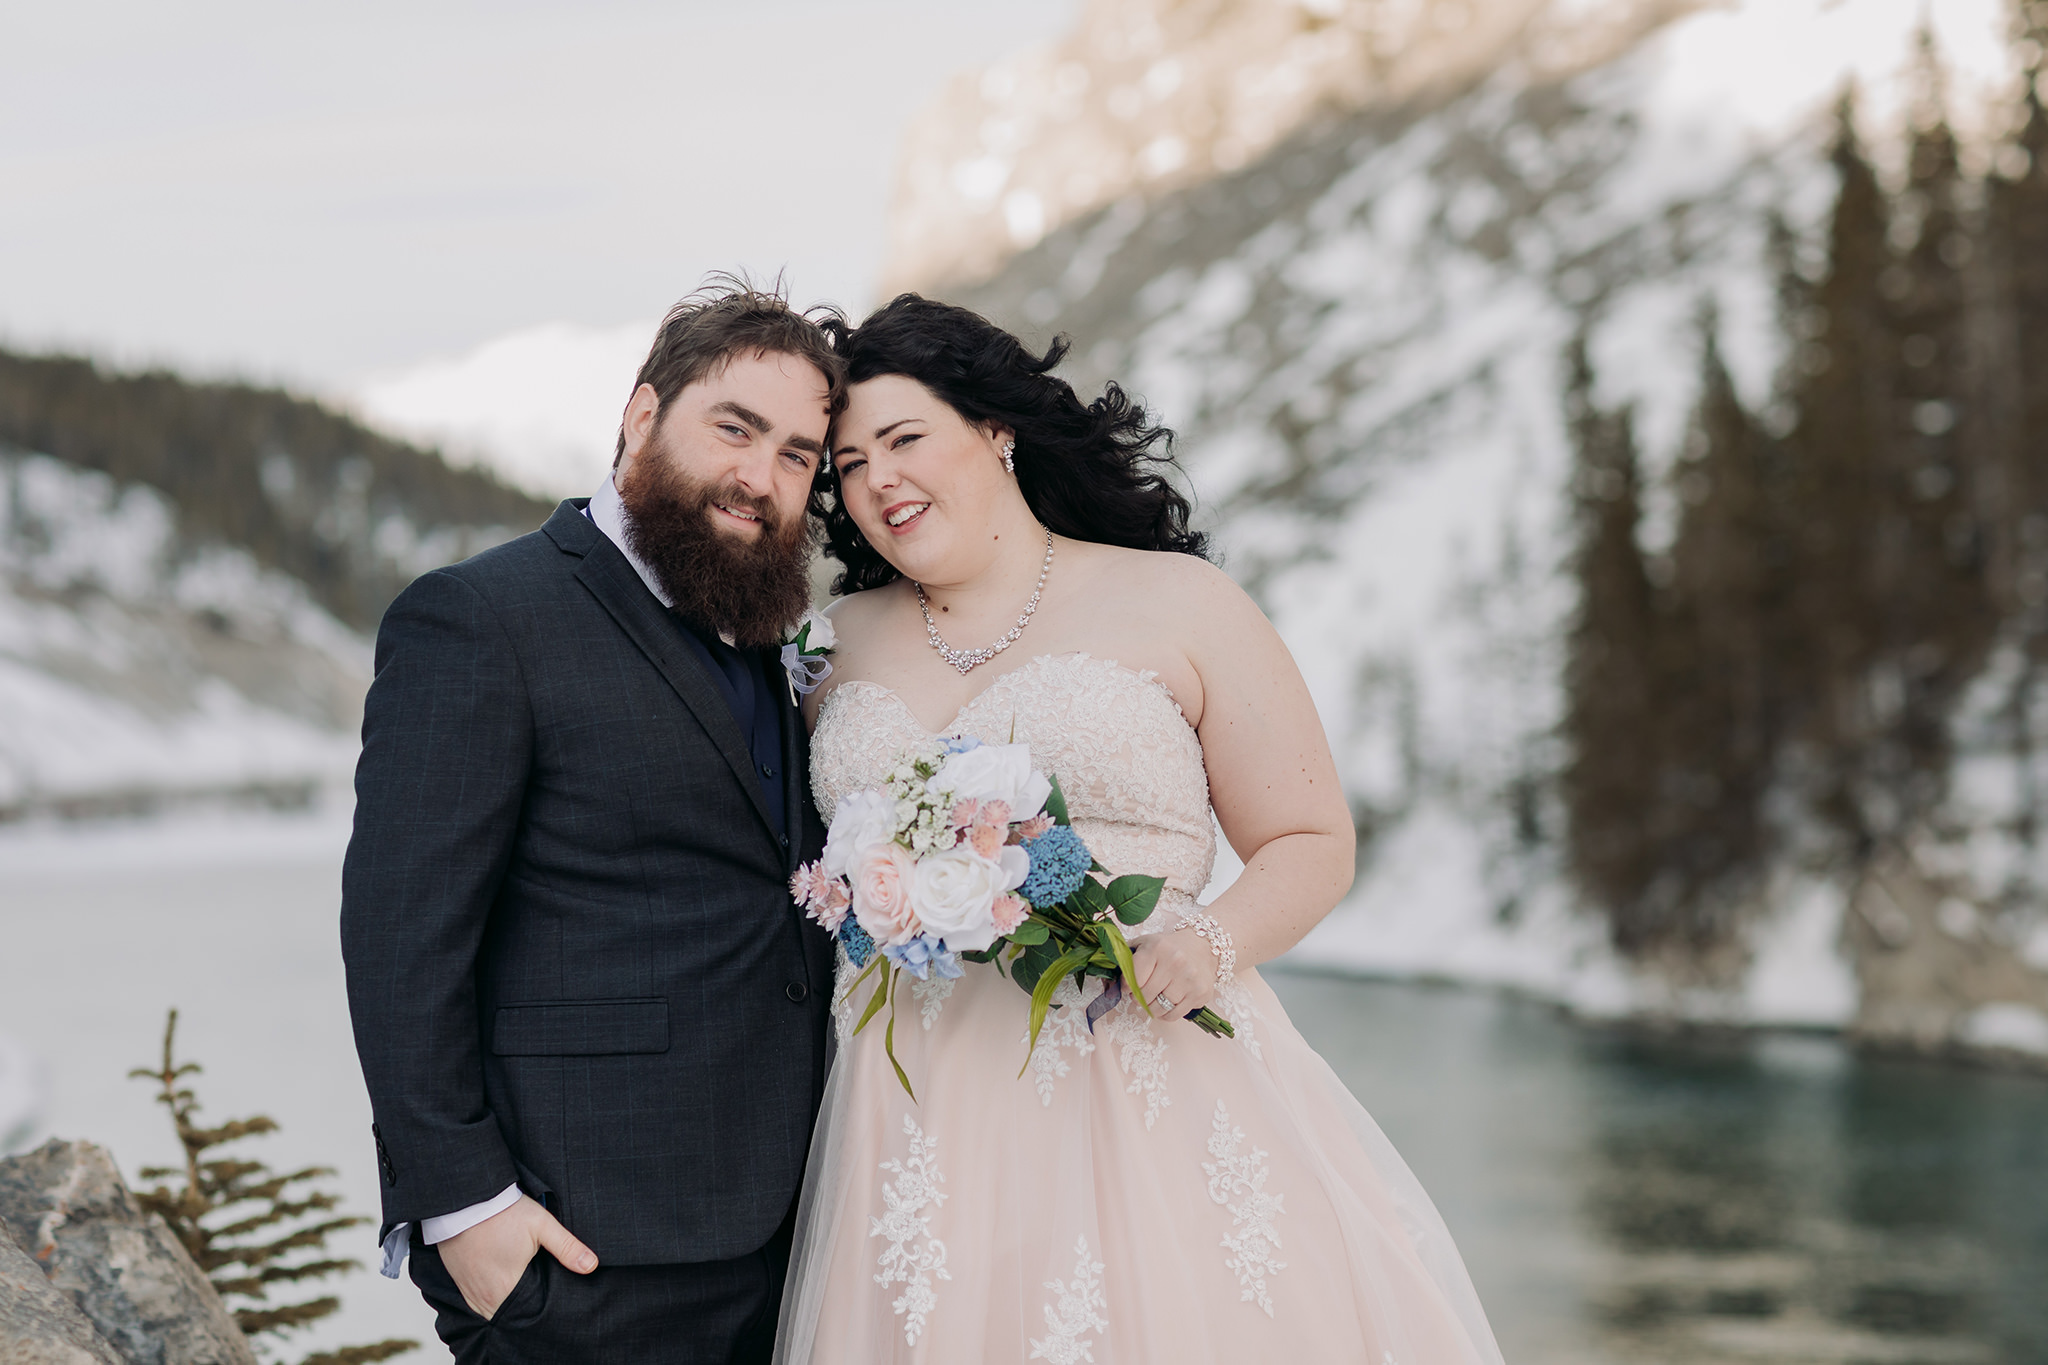  Canmore winter wedding photos bride & groom at Goat Pond in Kananaskis photographed by ENV Photography